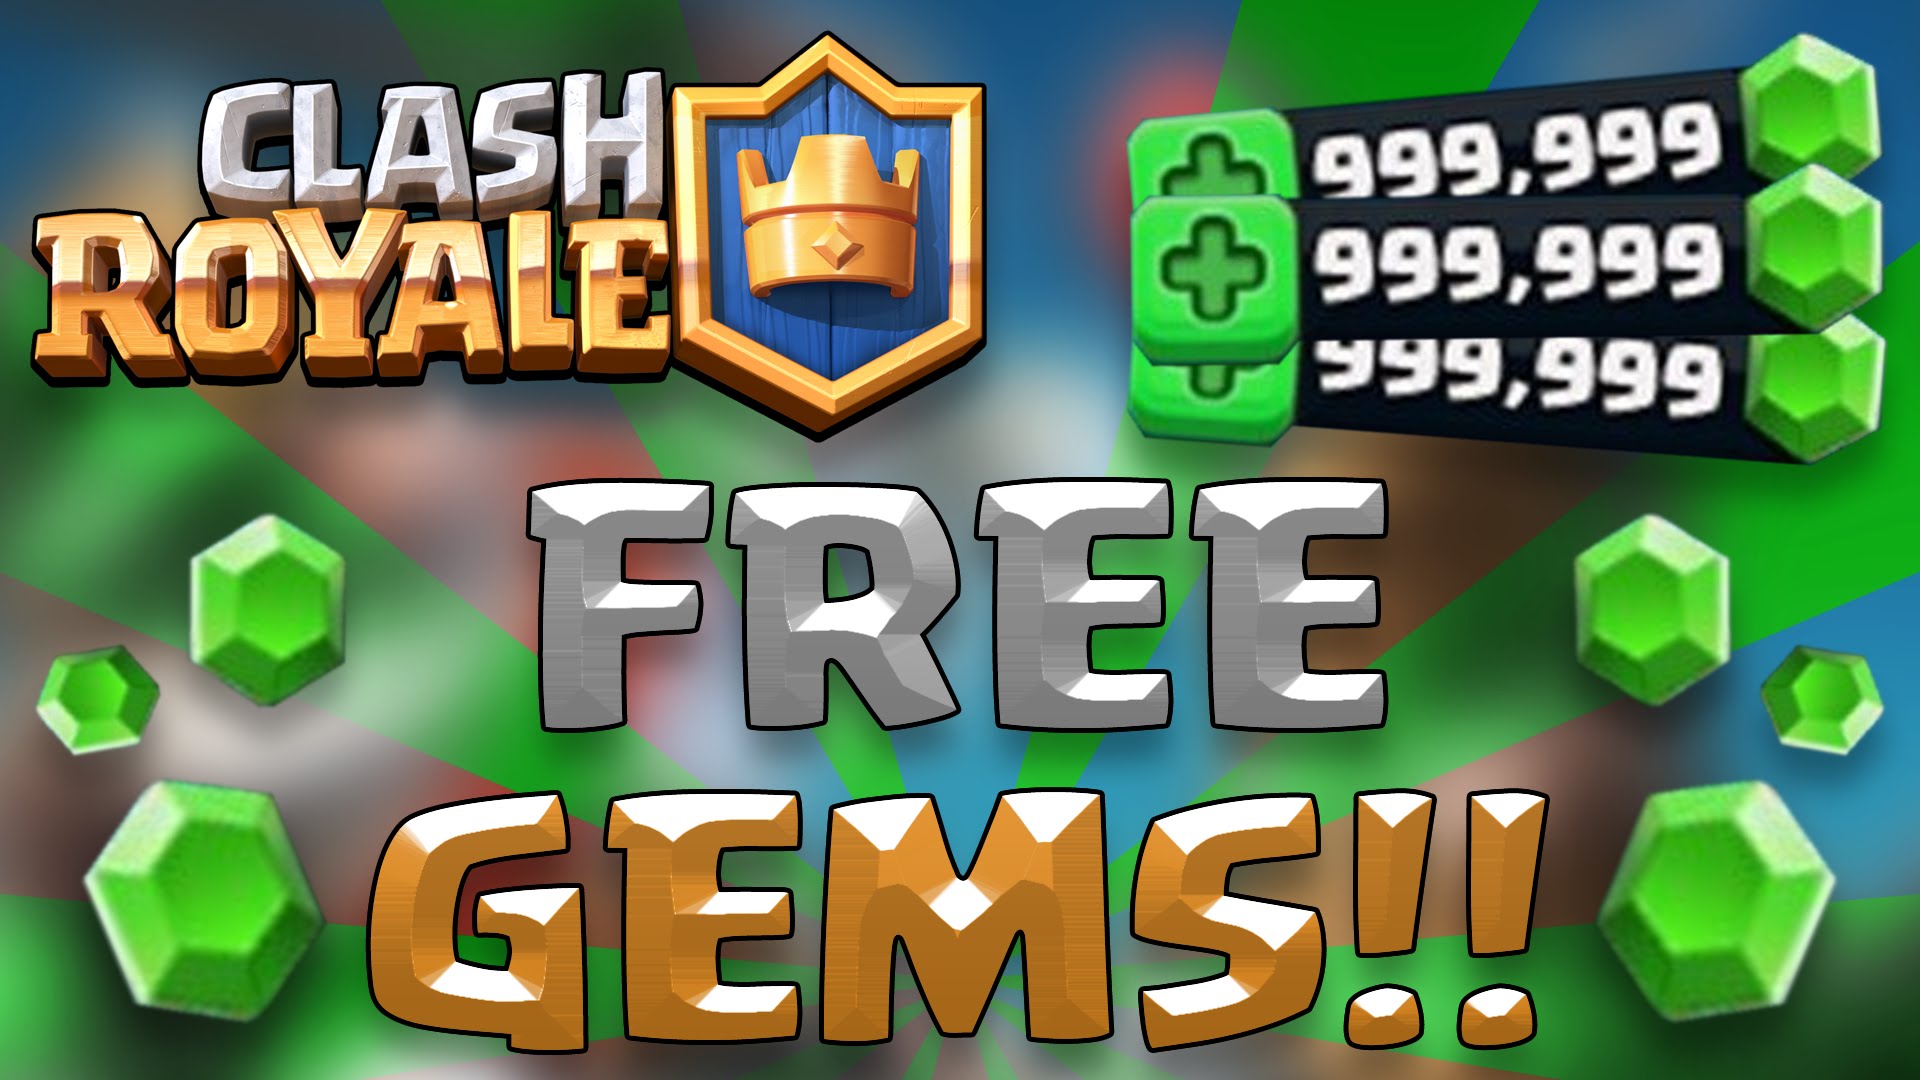 Can You Get Free Gems In Clash Royale